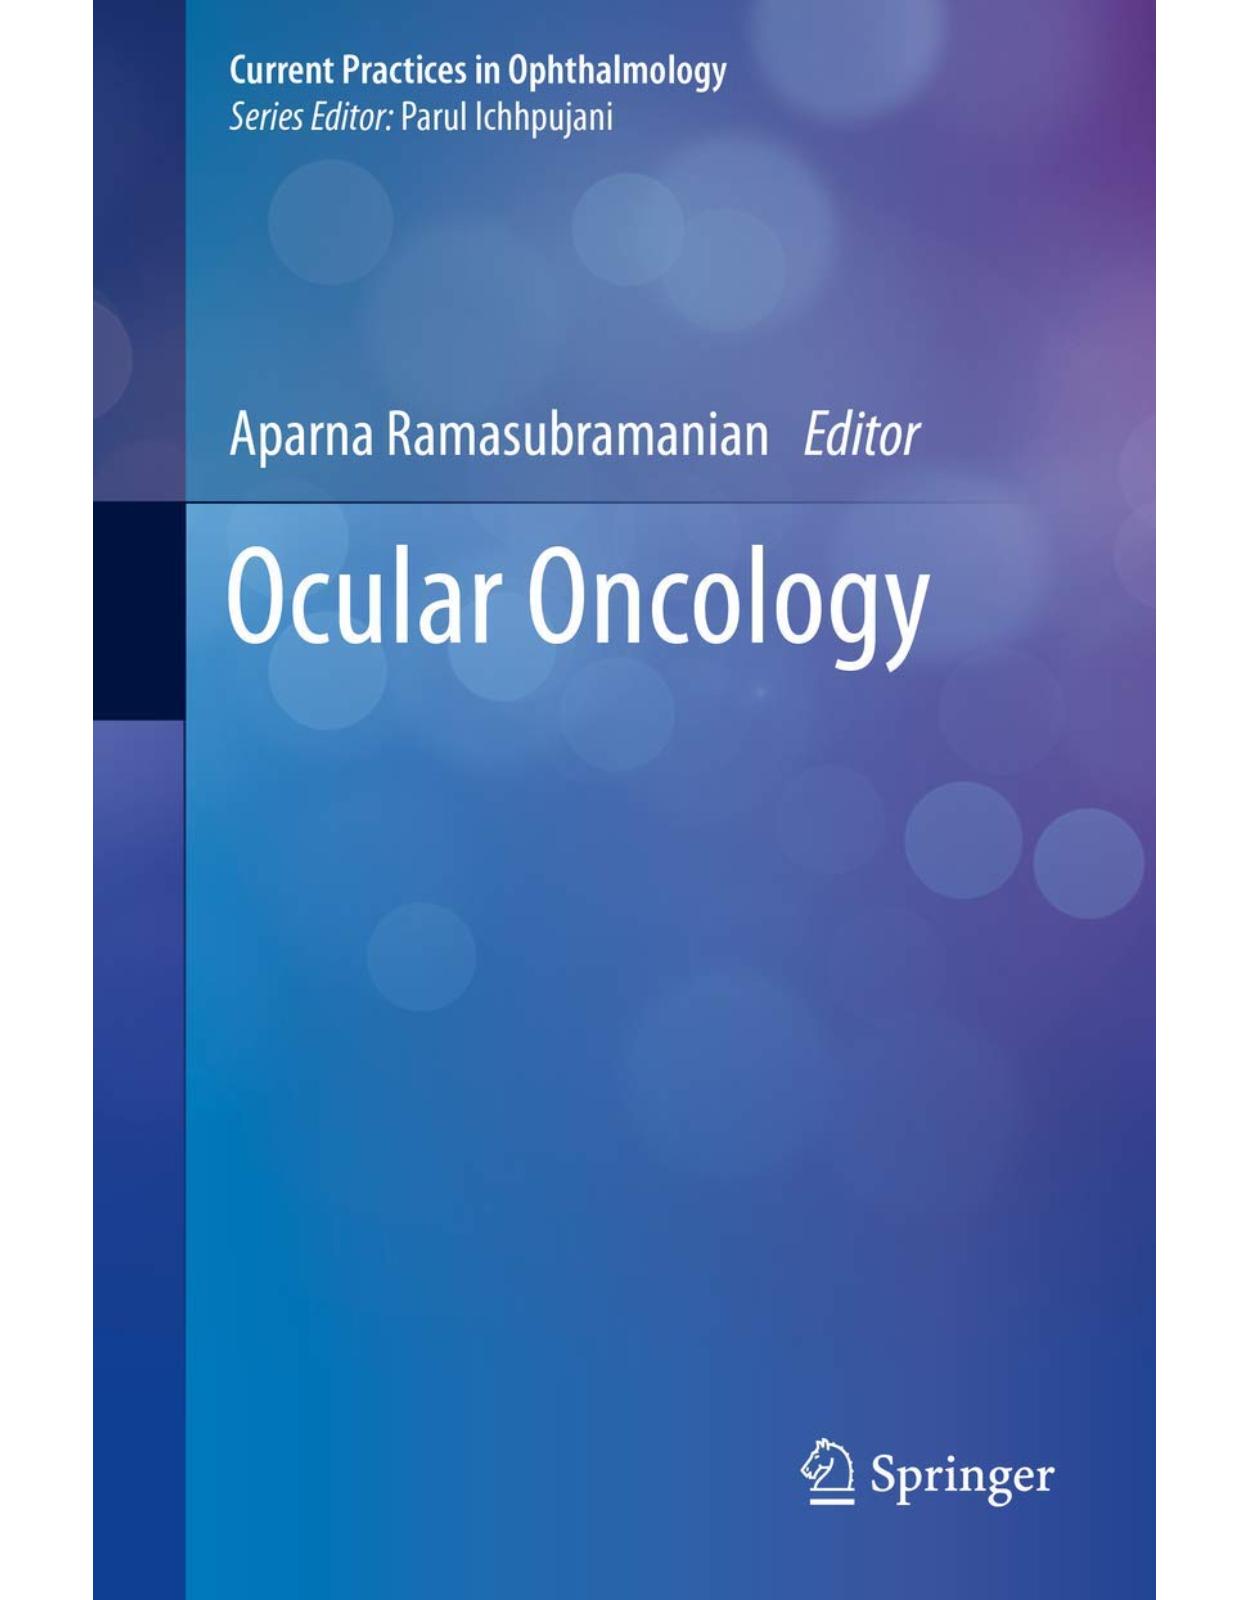 Ocular Oncology (Current Practices in Ophthalmology) 